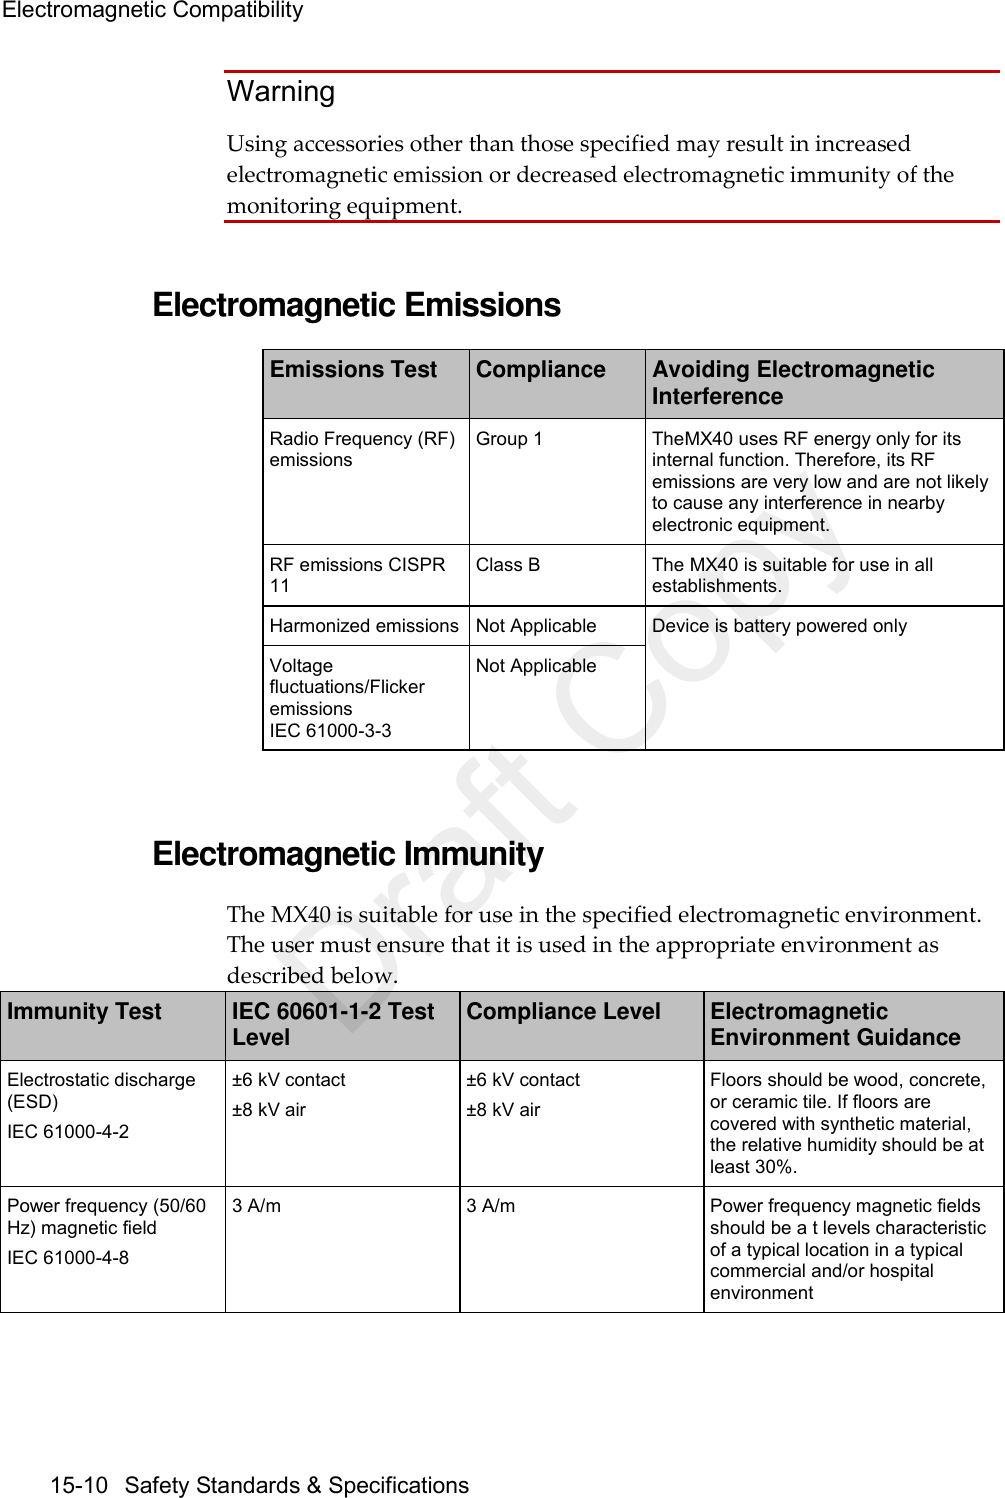 Electromagnetic Compatibility  15-10  Safety Standards &amp; Specifications Warning Using accessories other than those specified may result in increased electromagnetic emission or decreased electromagnetic immunity of the monitoring equipment.   Electromagnetic Emissions Emissions Test Compliance Avoiding Electromagnetic Interference Radio Frequency (RF) emissions Group 1 TheMX40 uses RF energy only for its internal function. Therefore, its RF emissions are very low and are not likely to cause any interference in nearby electronic equipment. RF emissions CISPR 11 Class B The MX40 is suitable for use in all establishments. Harmonized emissions Not Applicable Device is battery powered only Voltage fluctuations/Flicker emissions IEC 61000-3-3 Not Applicable   Electromagnetic Immunity The MX40 is suitable for use in the specified electromagnetic environment. The user must ensure that it is used in the appropriate environment as described below. Immunity Test IEC 60601-1-2 Test Level Compliance Level Electromagnetic Environment Guidance Electrostatic discharge (ESD)  IEC 61000-4-2 ±6 kV contact ±8 kV air ±6 kV contact ±8 kV air Floors should be wood, concrete, or ceramic tile. If floors are covered with synthetic material, the relative humidity should be at least 30%. Power frequency (50/60 Hz) magnetic field IEC 61000-4-8 3 A/m 3 A/m Power frequency magnetic fields should be a t levels characteristic of a typical location in a typical commercial and/or hospital environment   Draft Copy